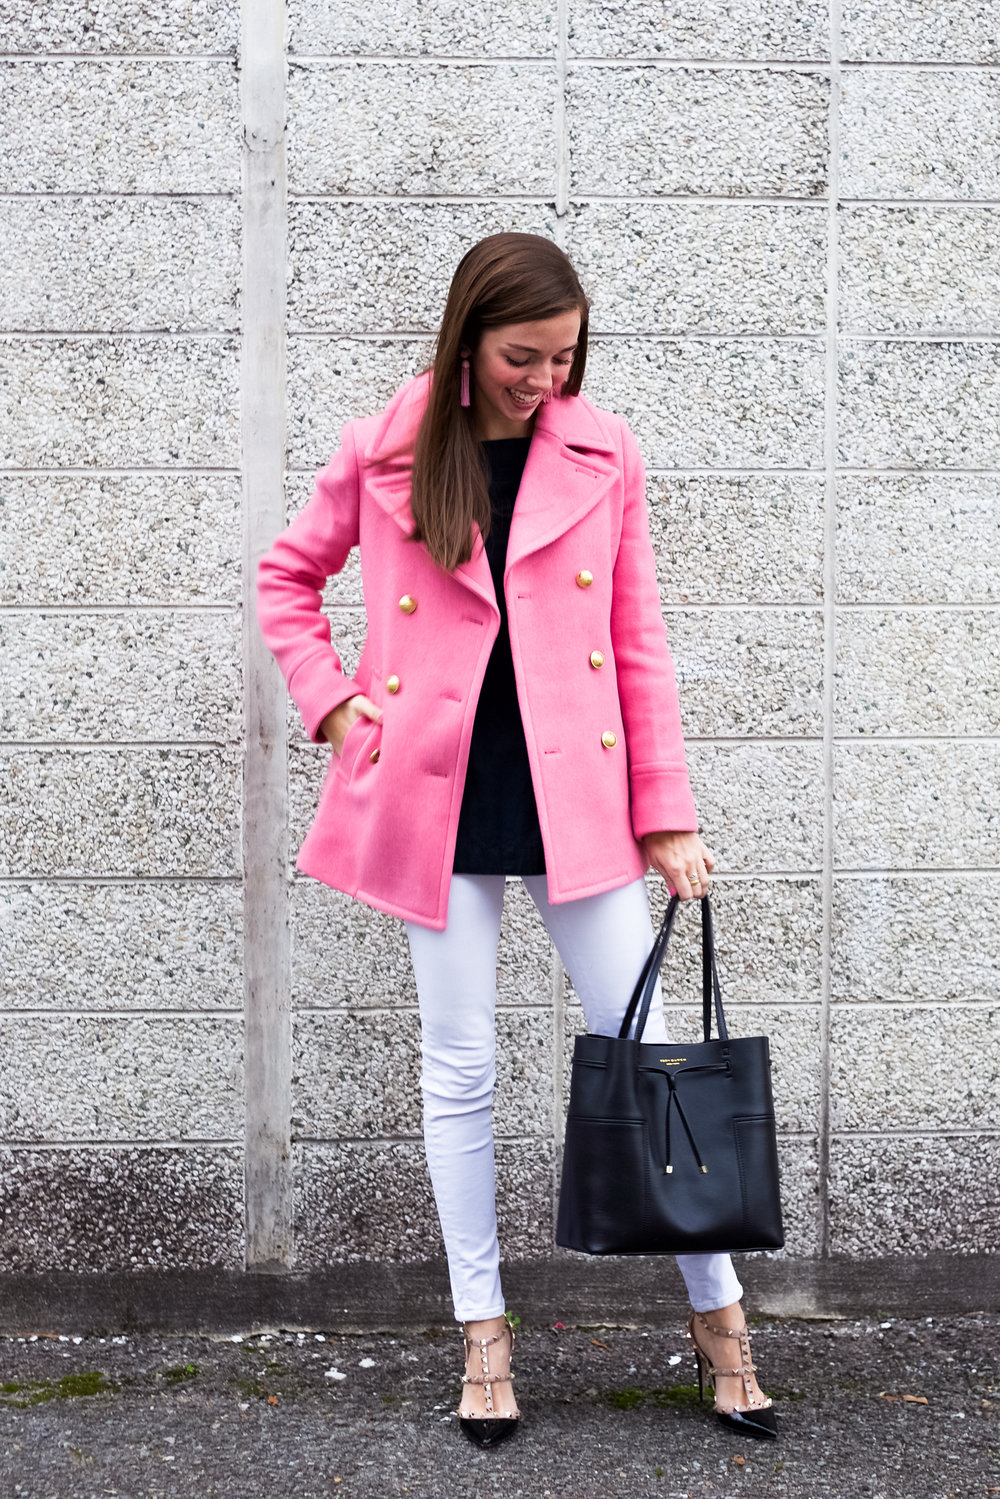 Pink + Black // Valentine's Day Outfit Inspo — LCB STYLE